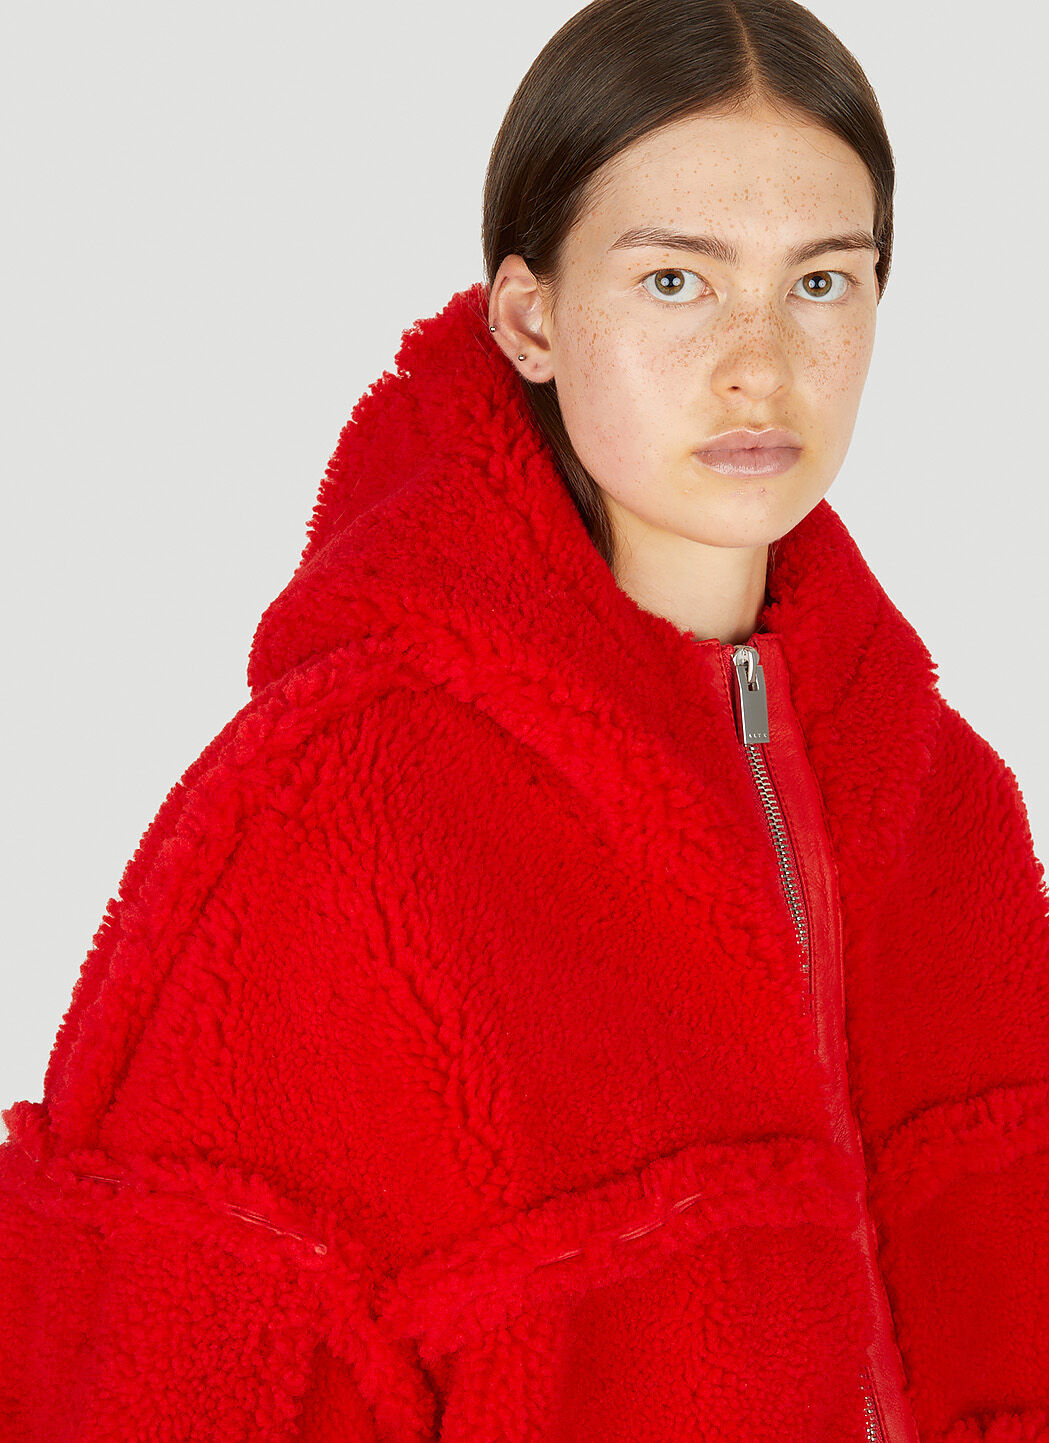 1017 ALYX 9SM Oversized Shearling Jacket in Red | LN-CC